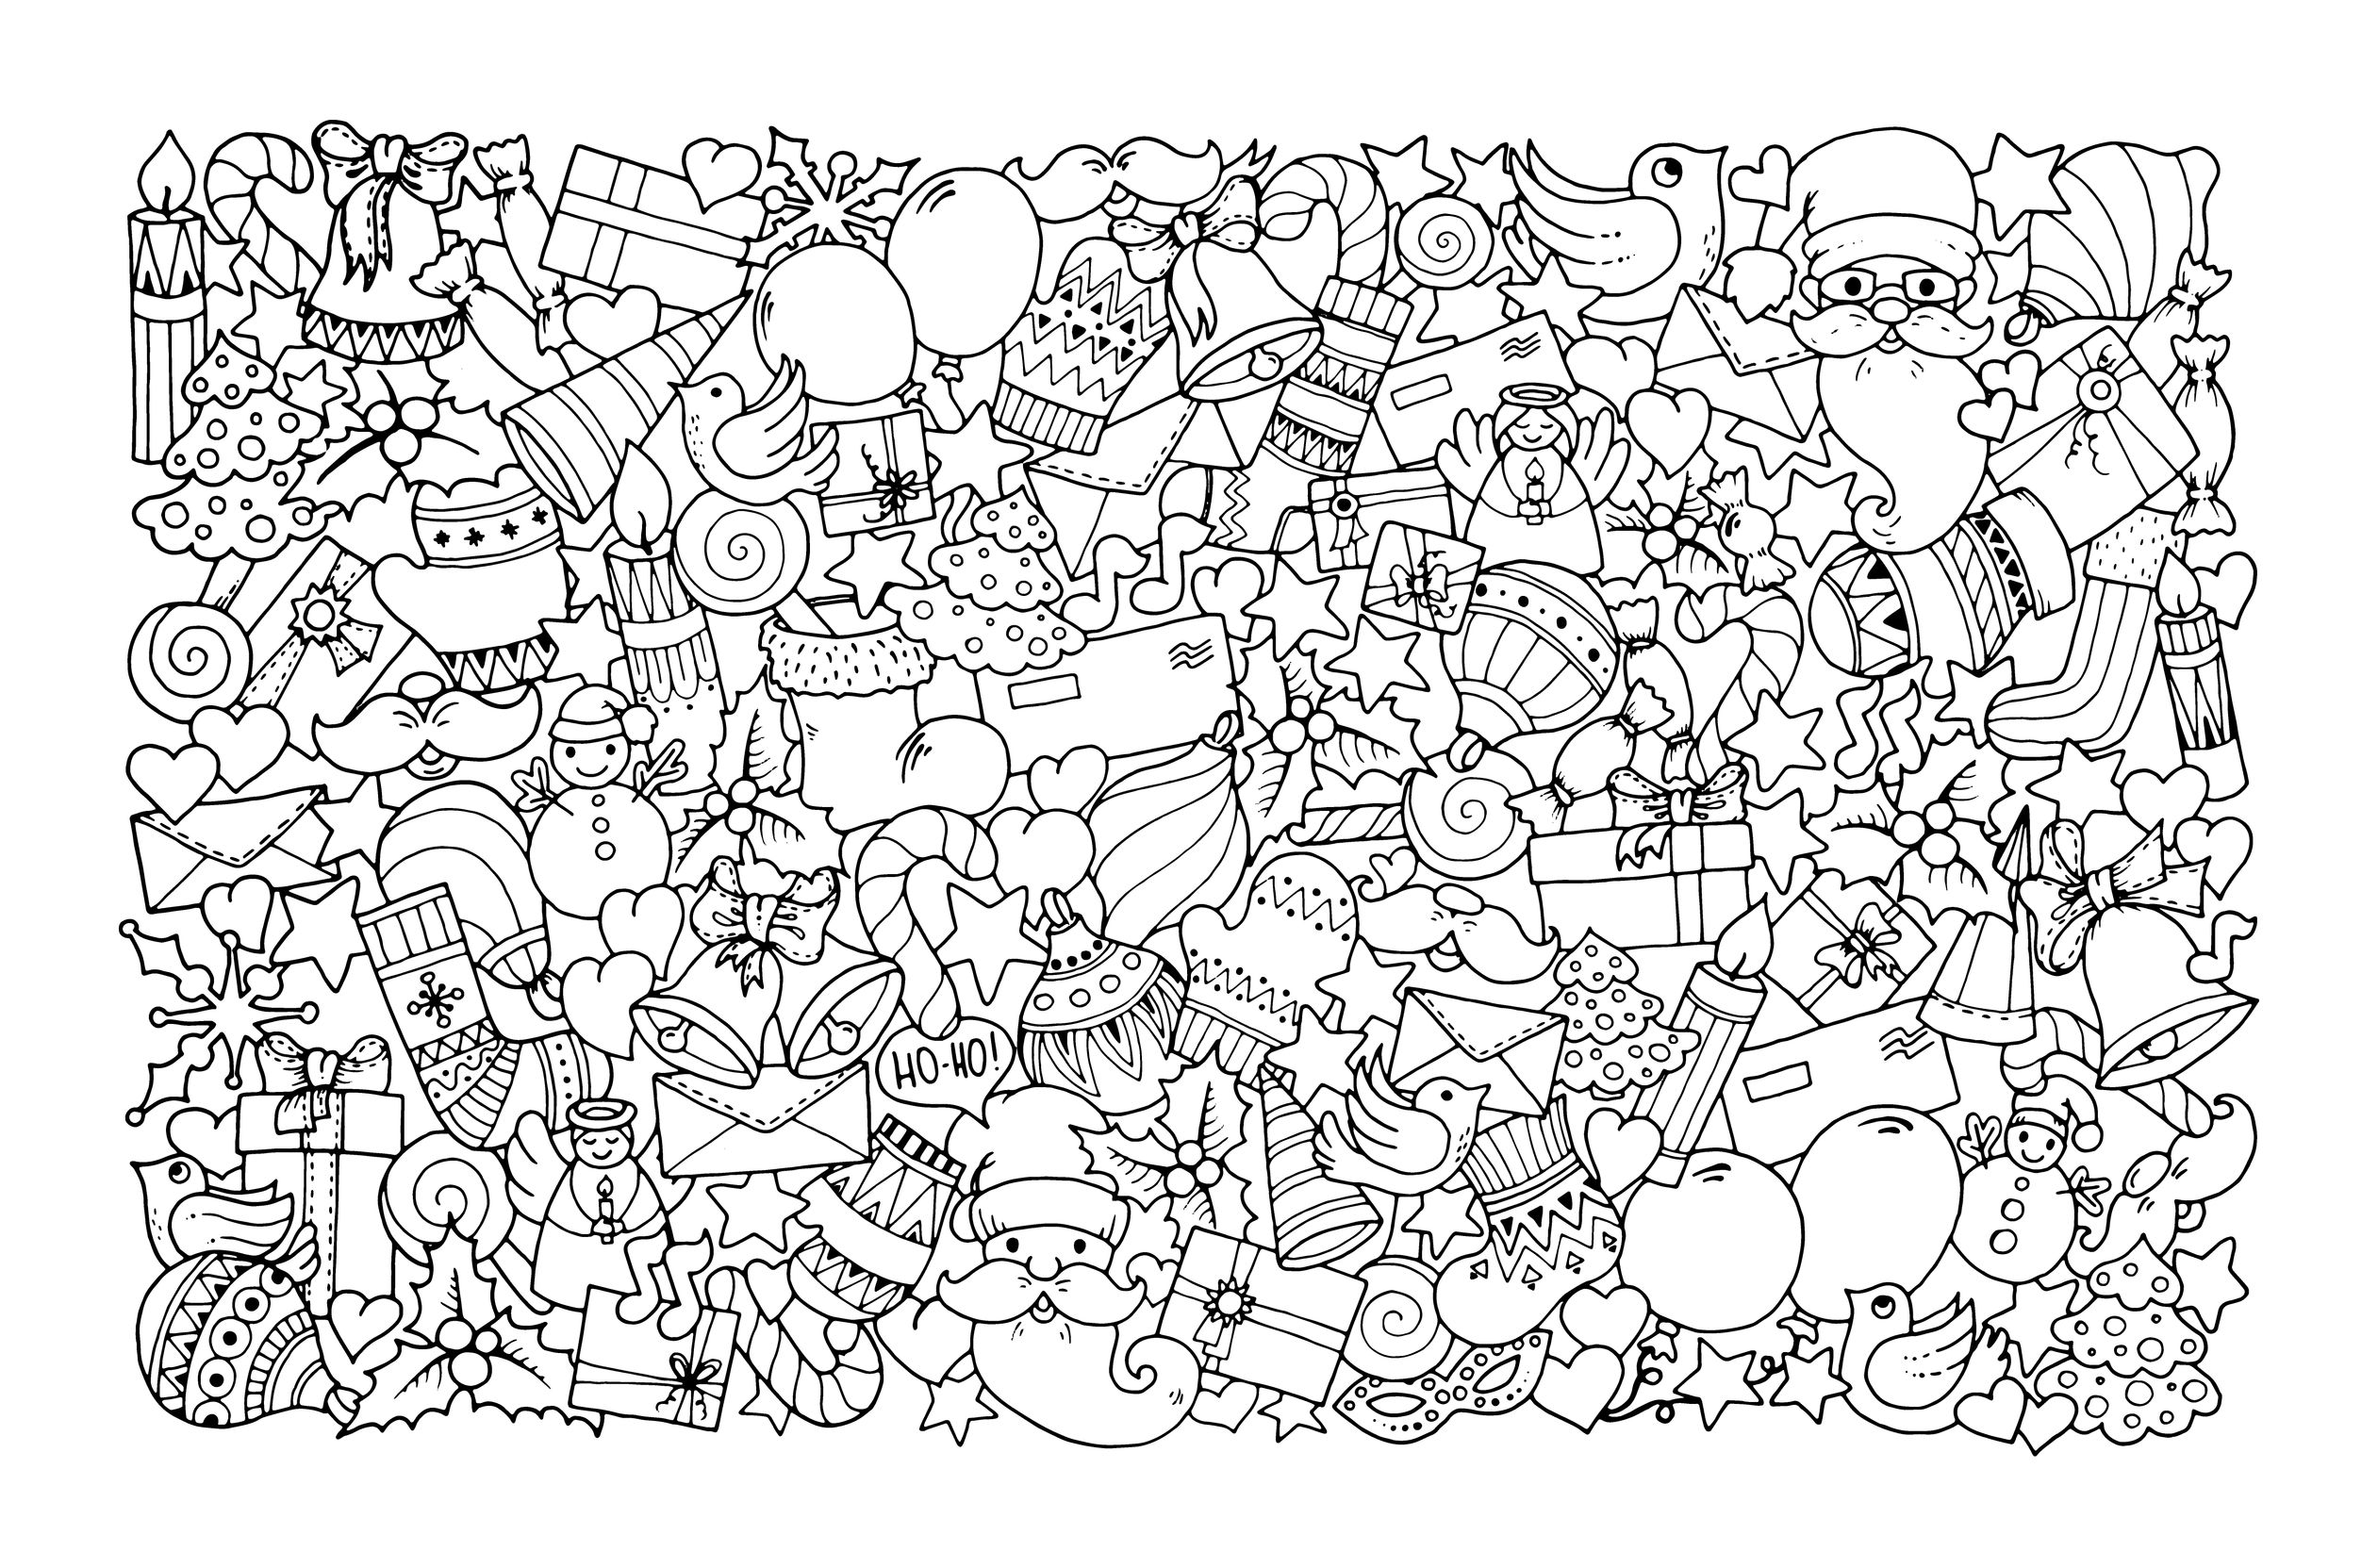  Christmas  Coloring  Pages  for Adults Best Coloring  Pages  